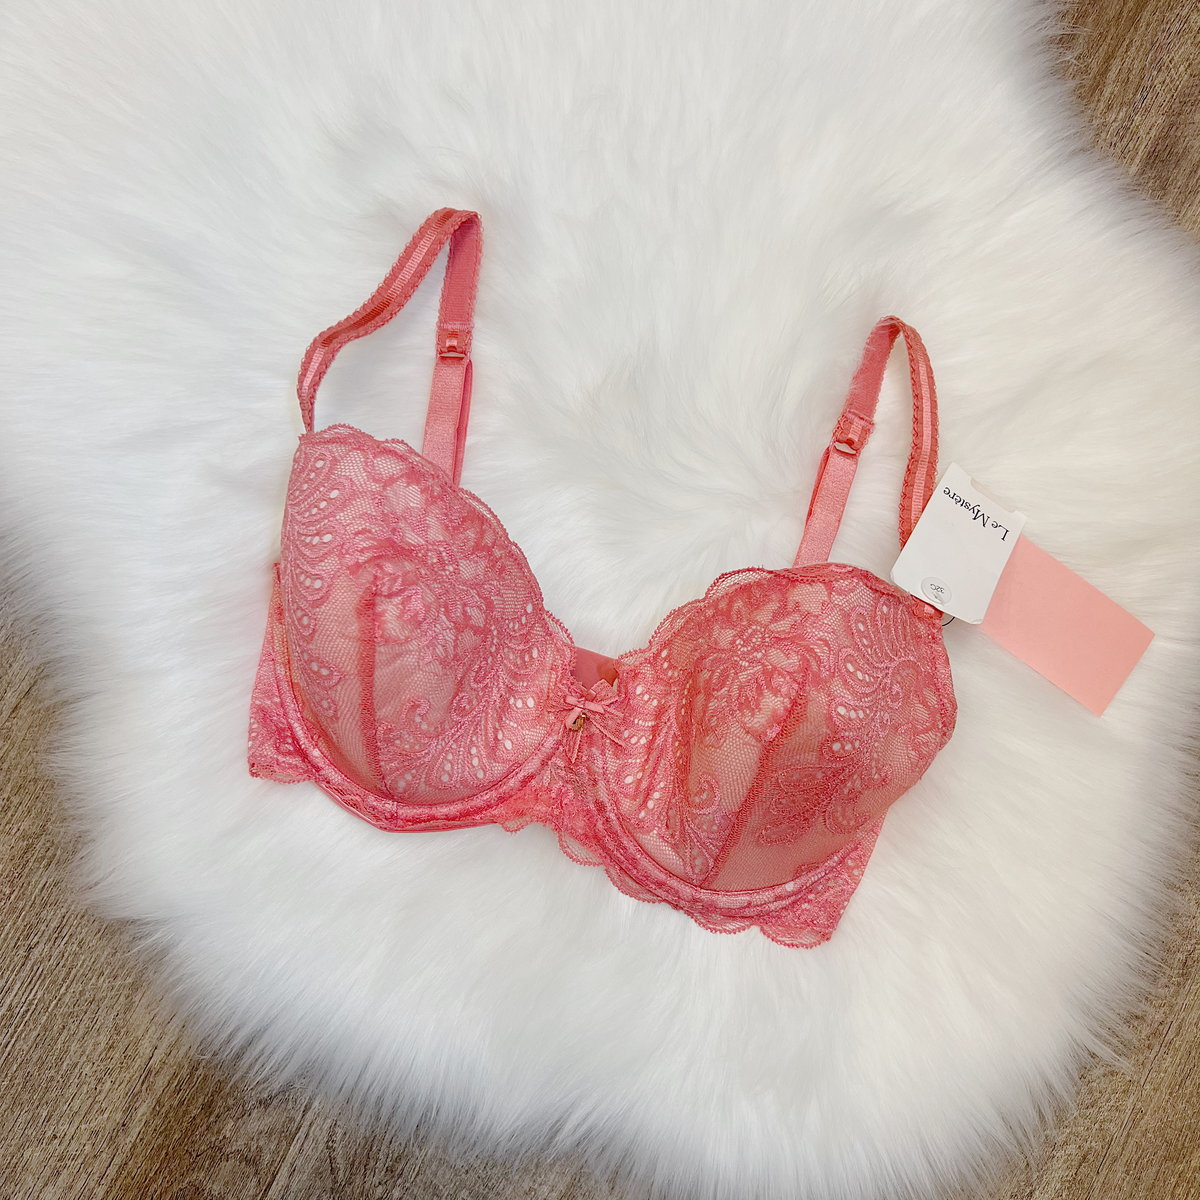 NWT Victoria's Secret Lace Bra Bralette Padded XS S 36D 32D 32C Sexy Pink  Red